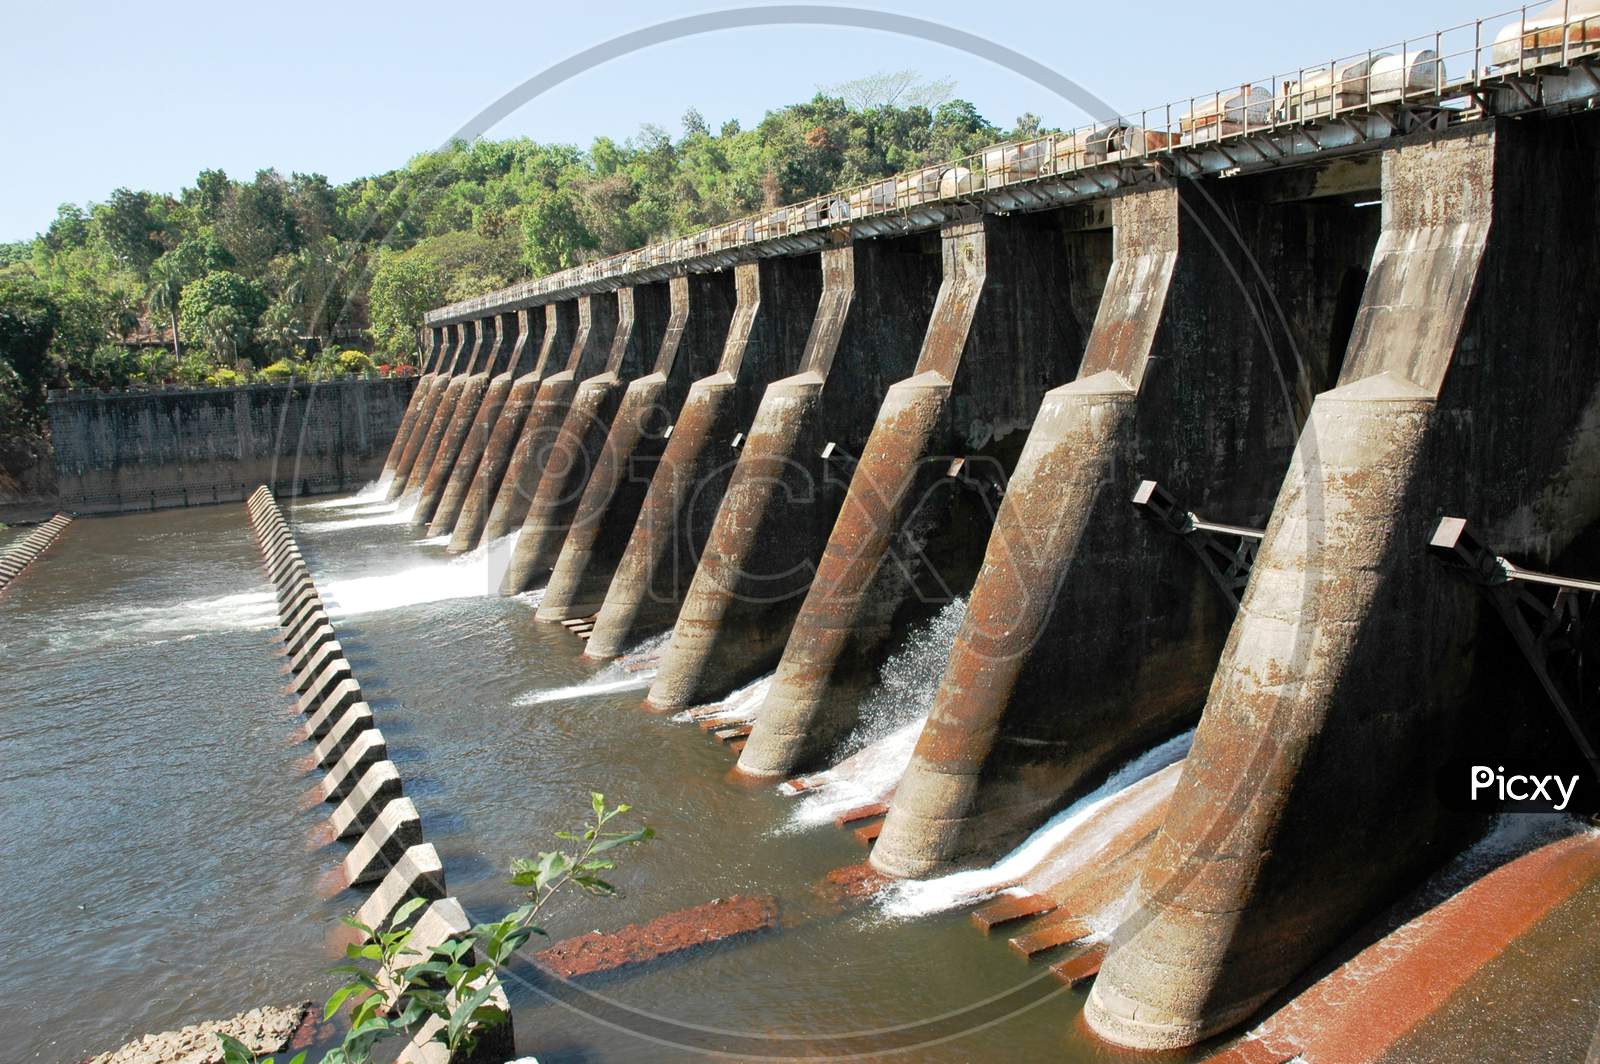 DAMS AND POOLS IN INDIA